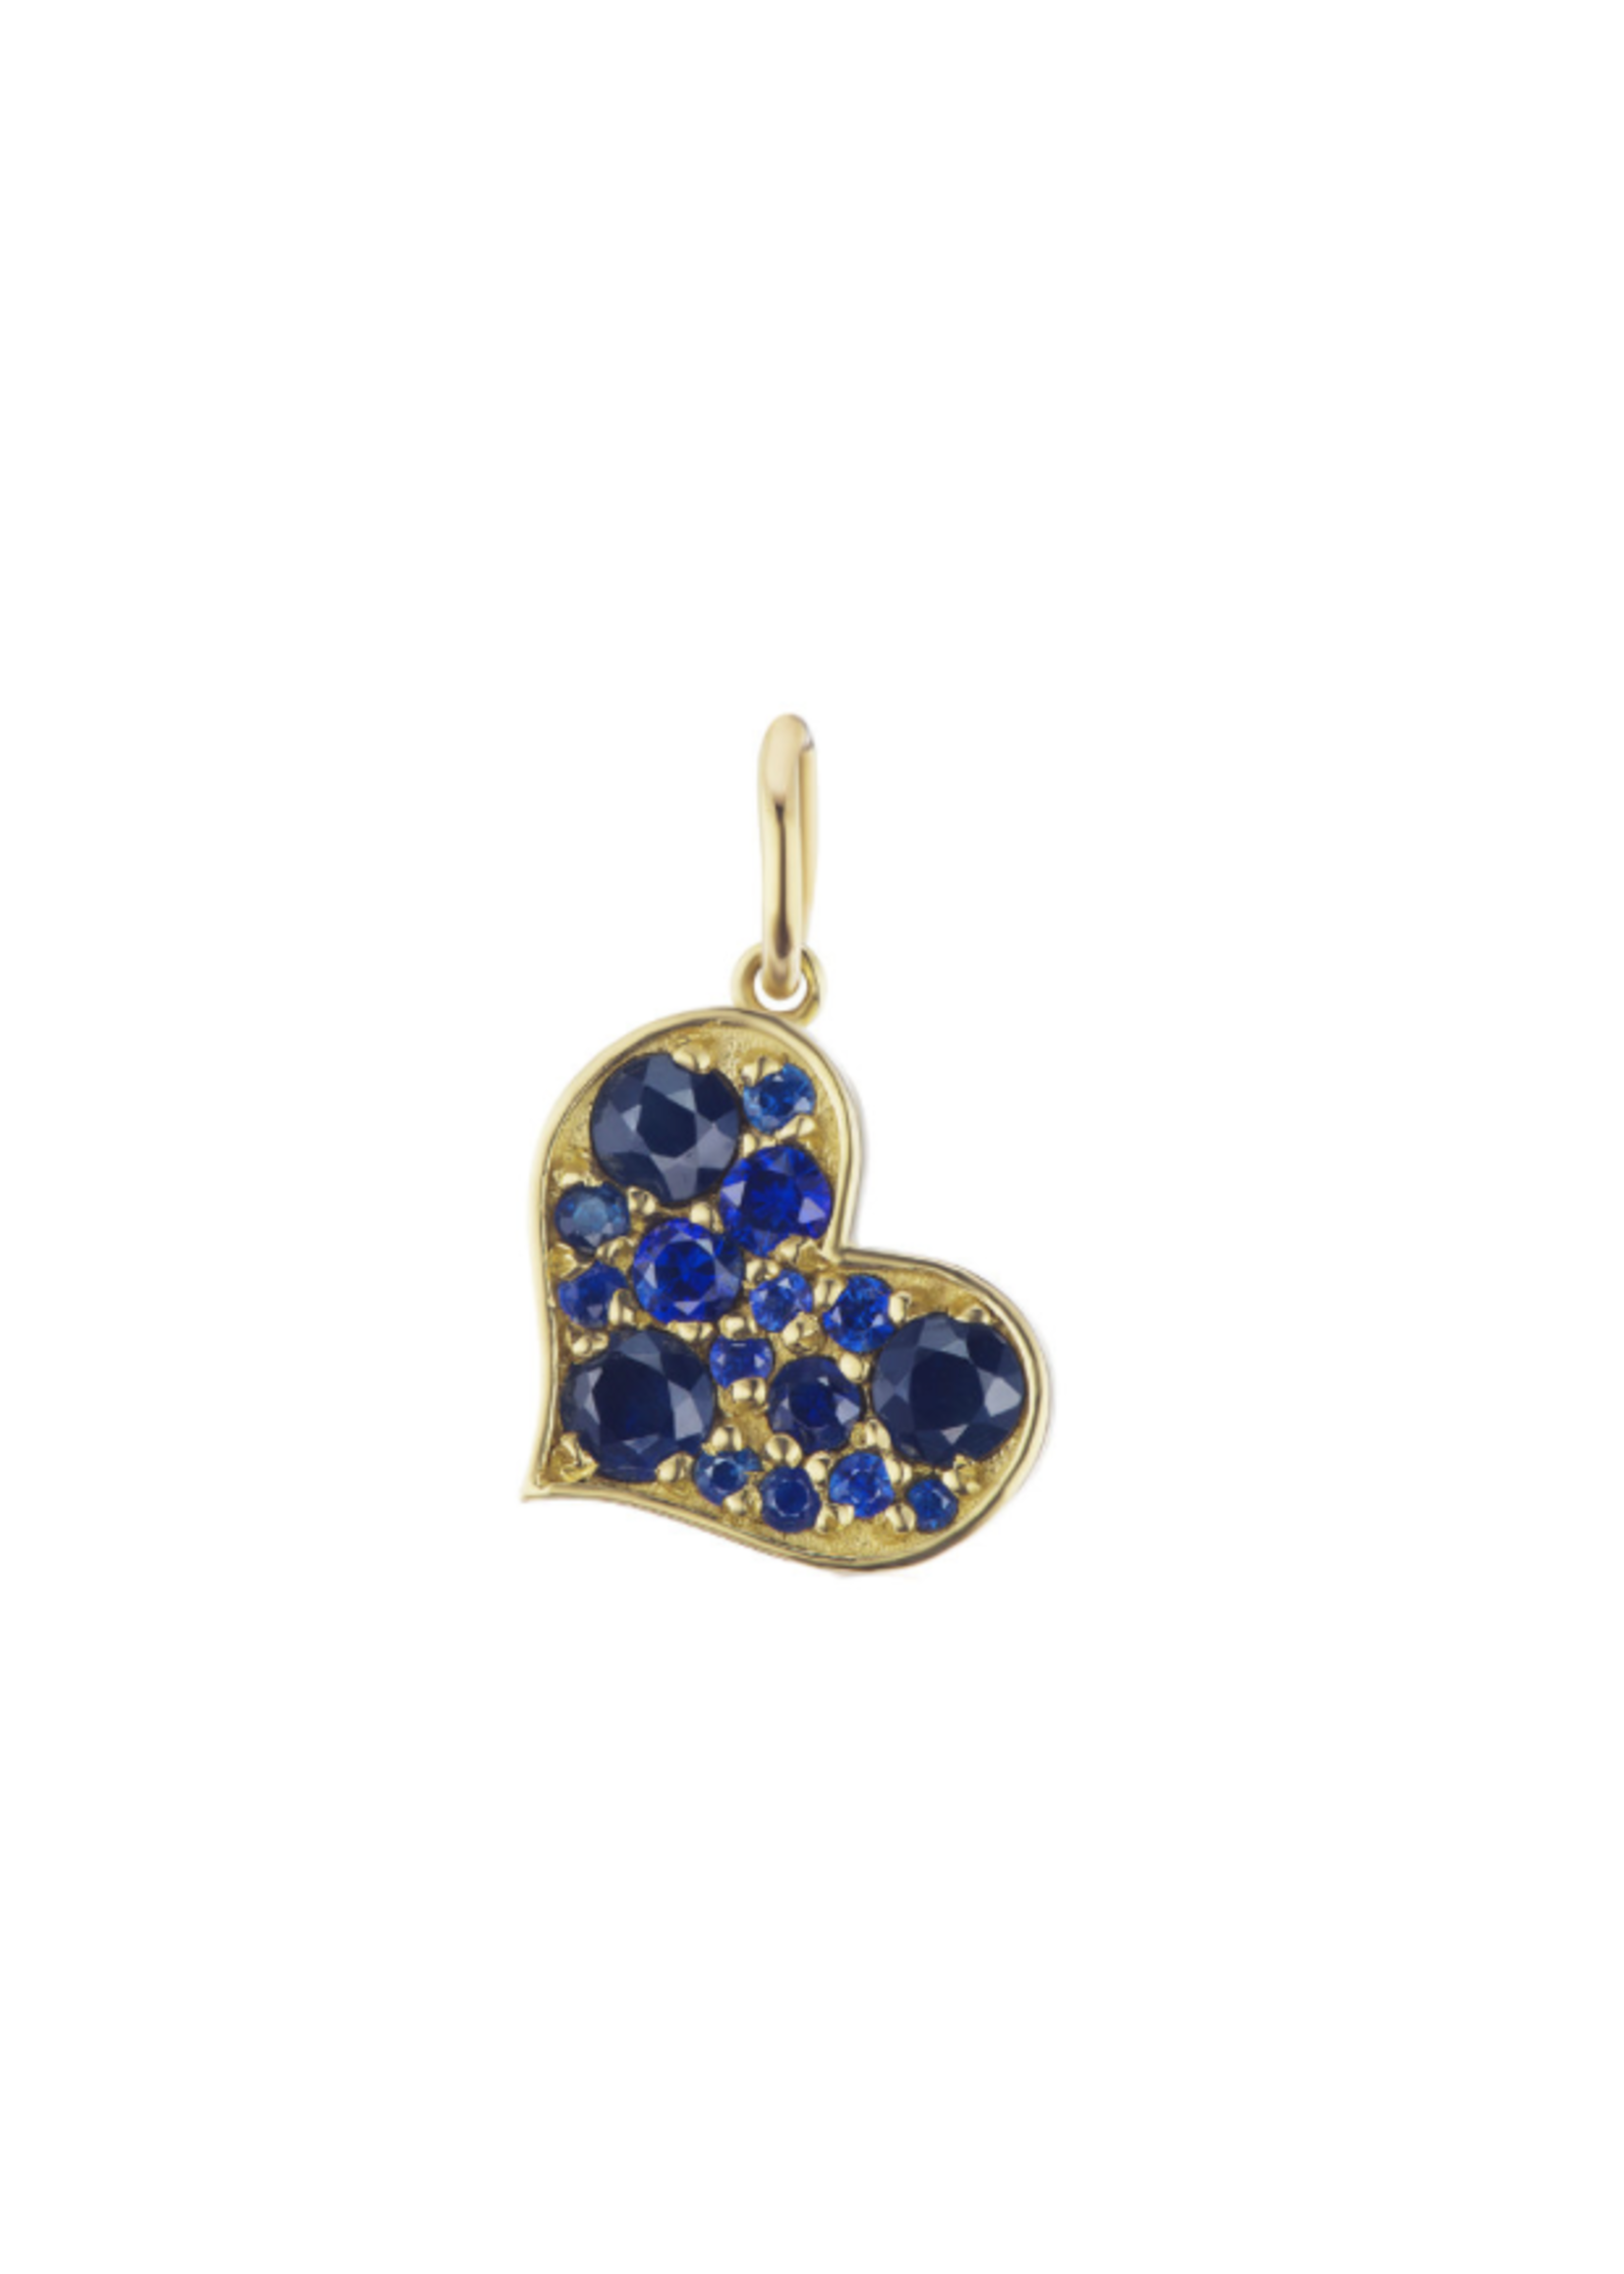 Have a Heart Small Heart Charm